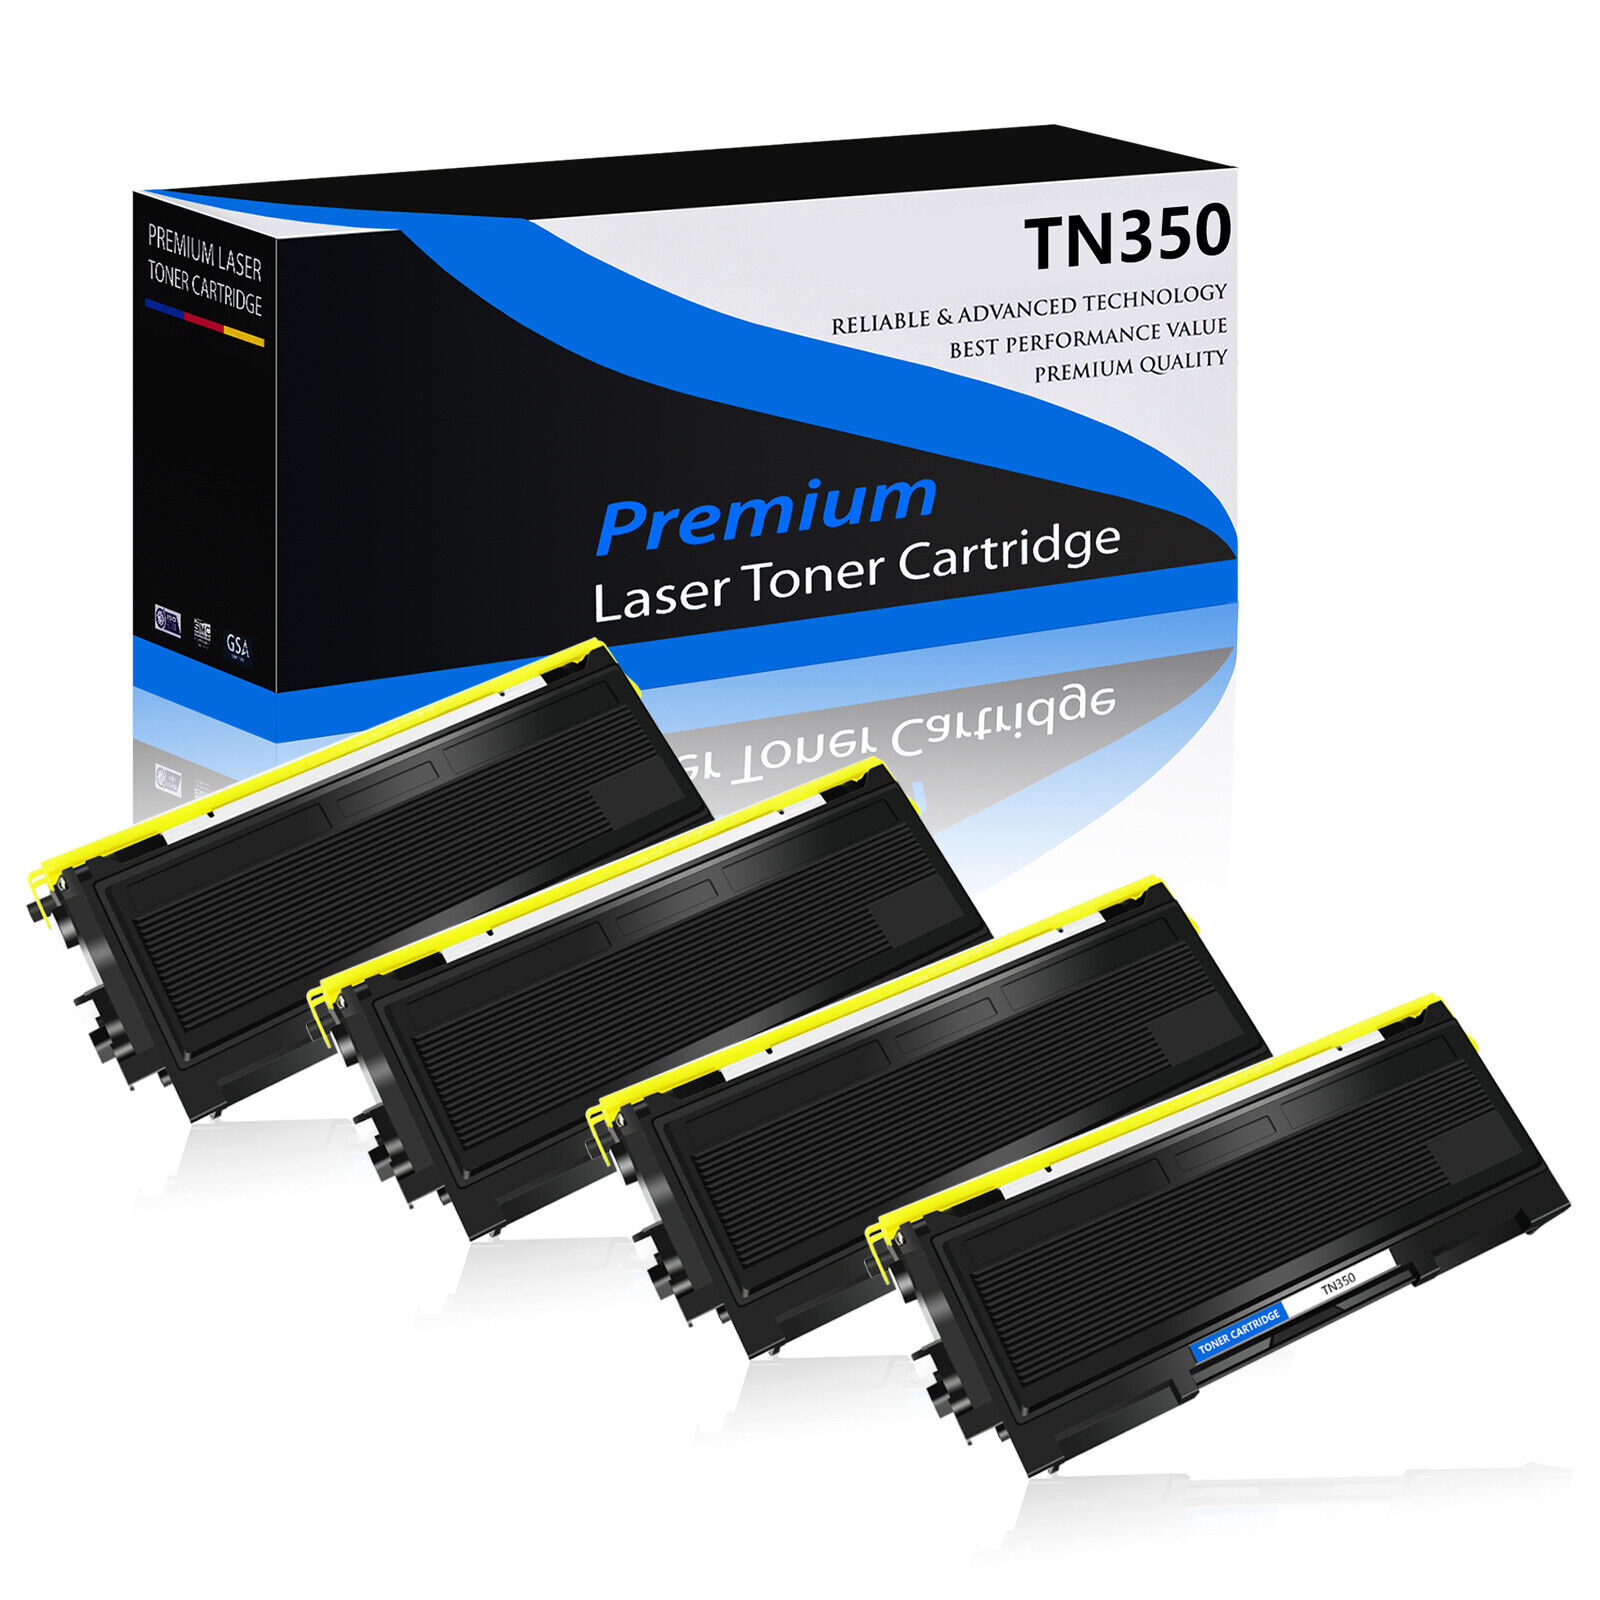 4PK TN350 Black Toner Cartridge for Brother MFC-7820N DCP-7010 DCP-7020 DCP-7025